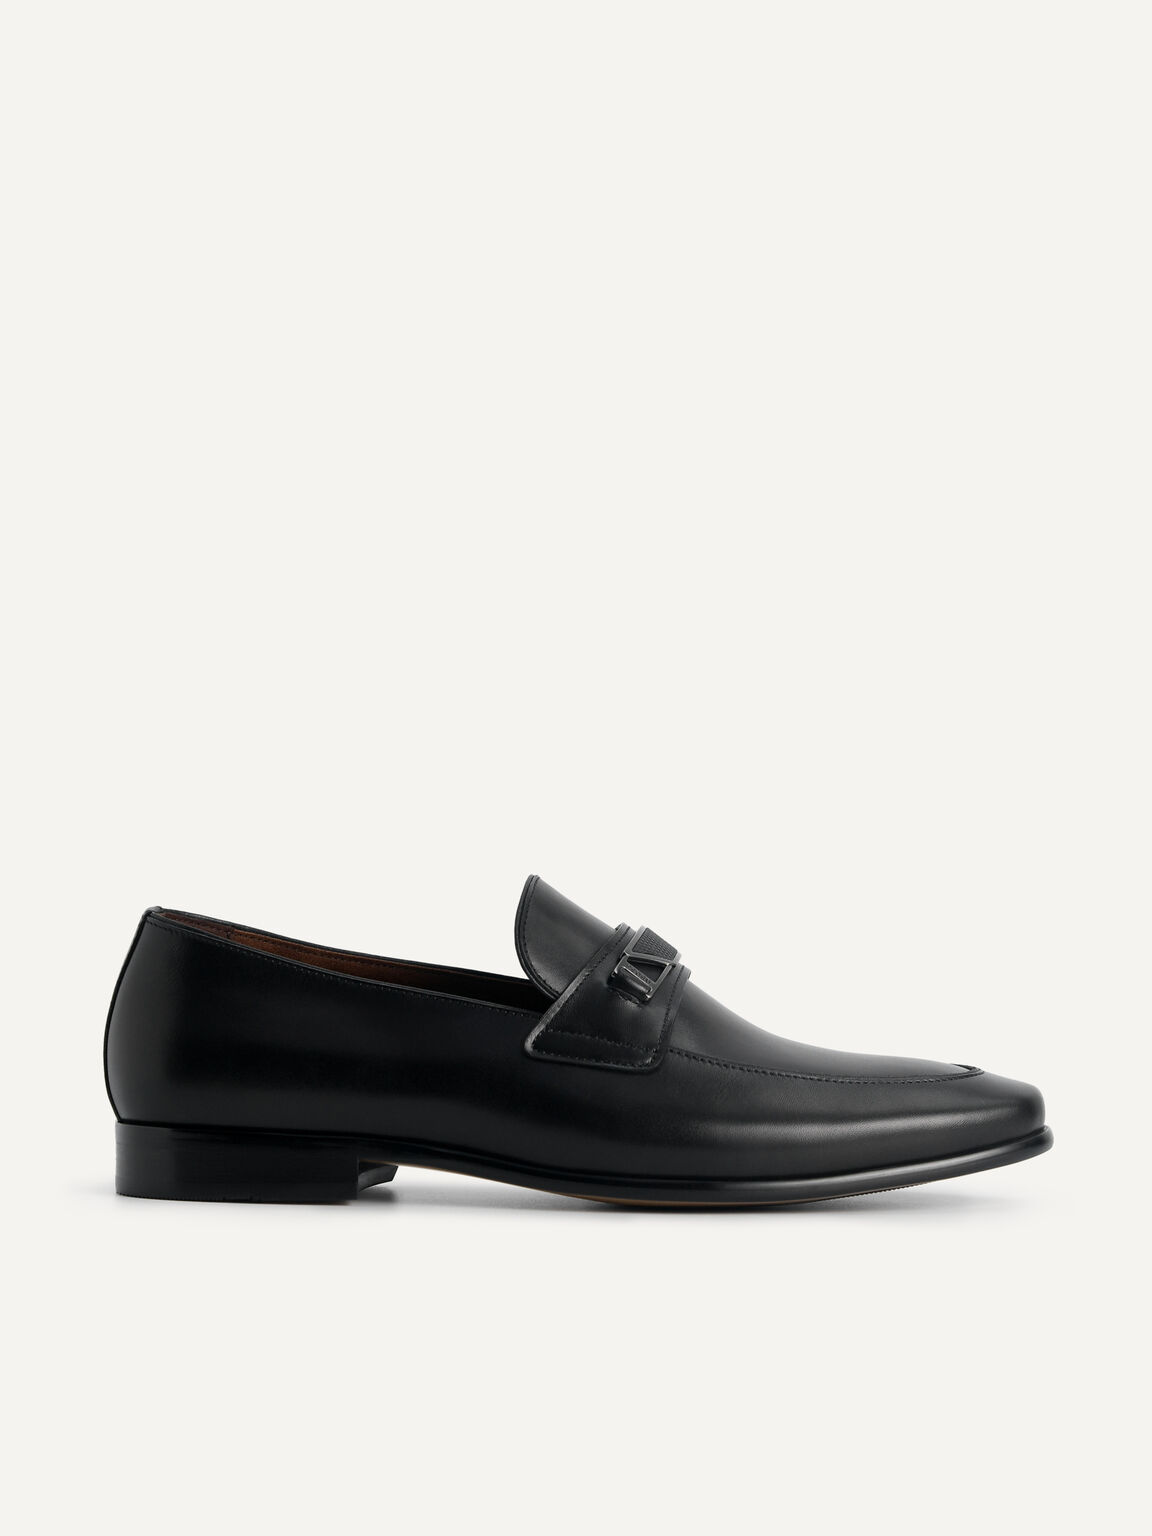 Leather Loafers with Metal Bit, Black